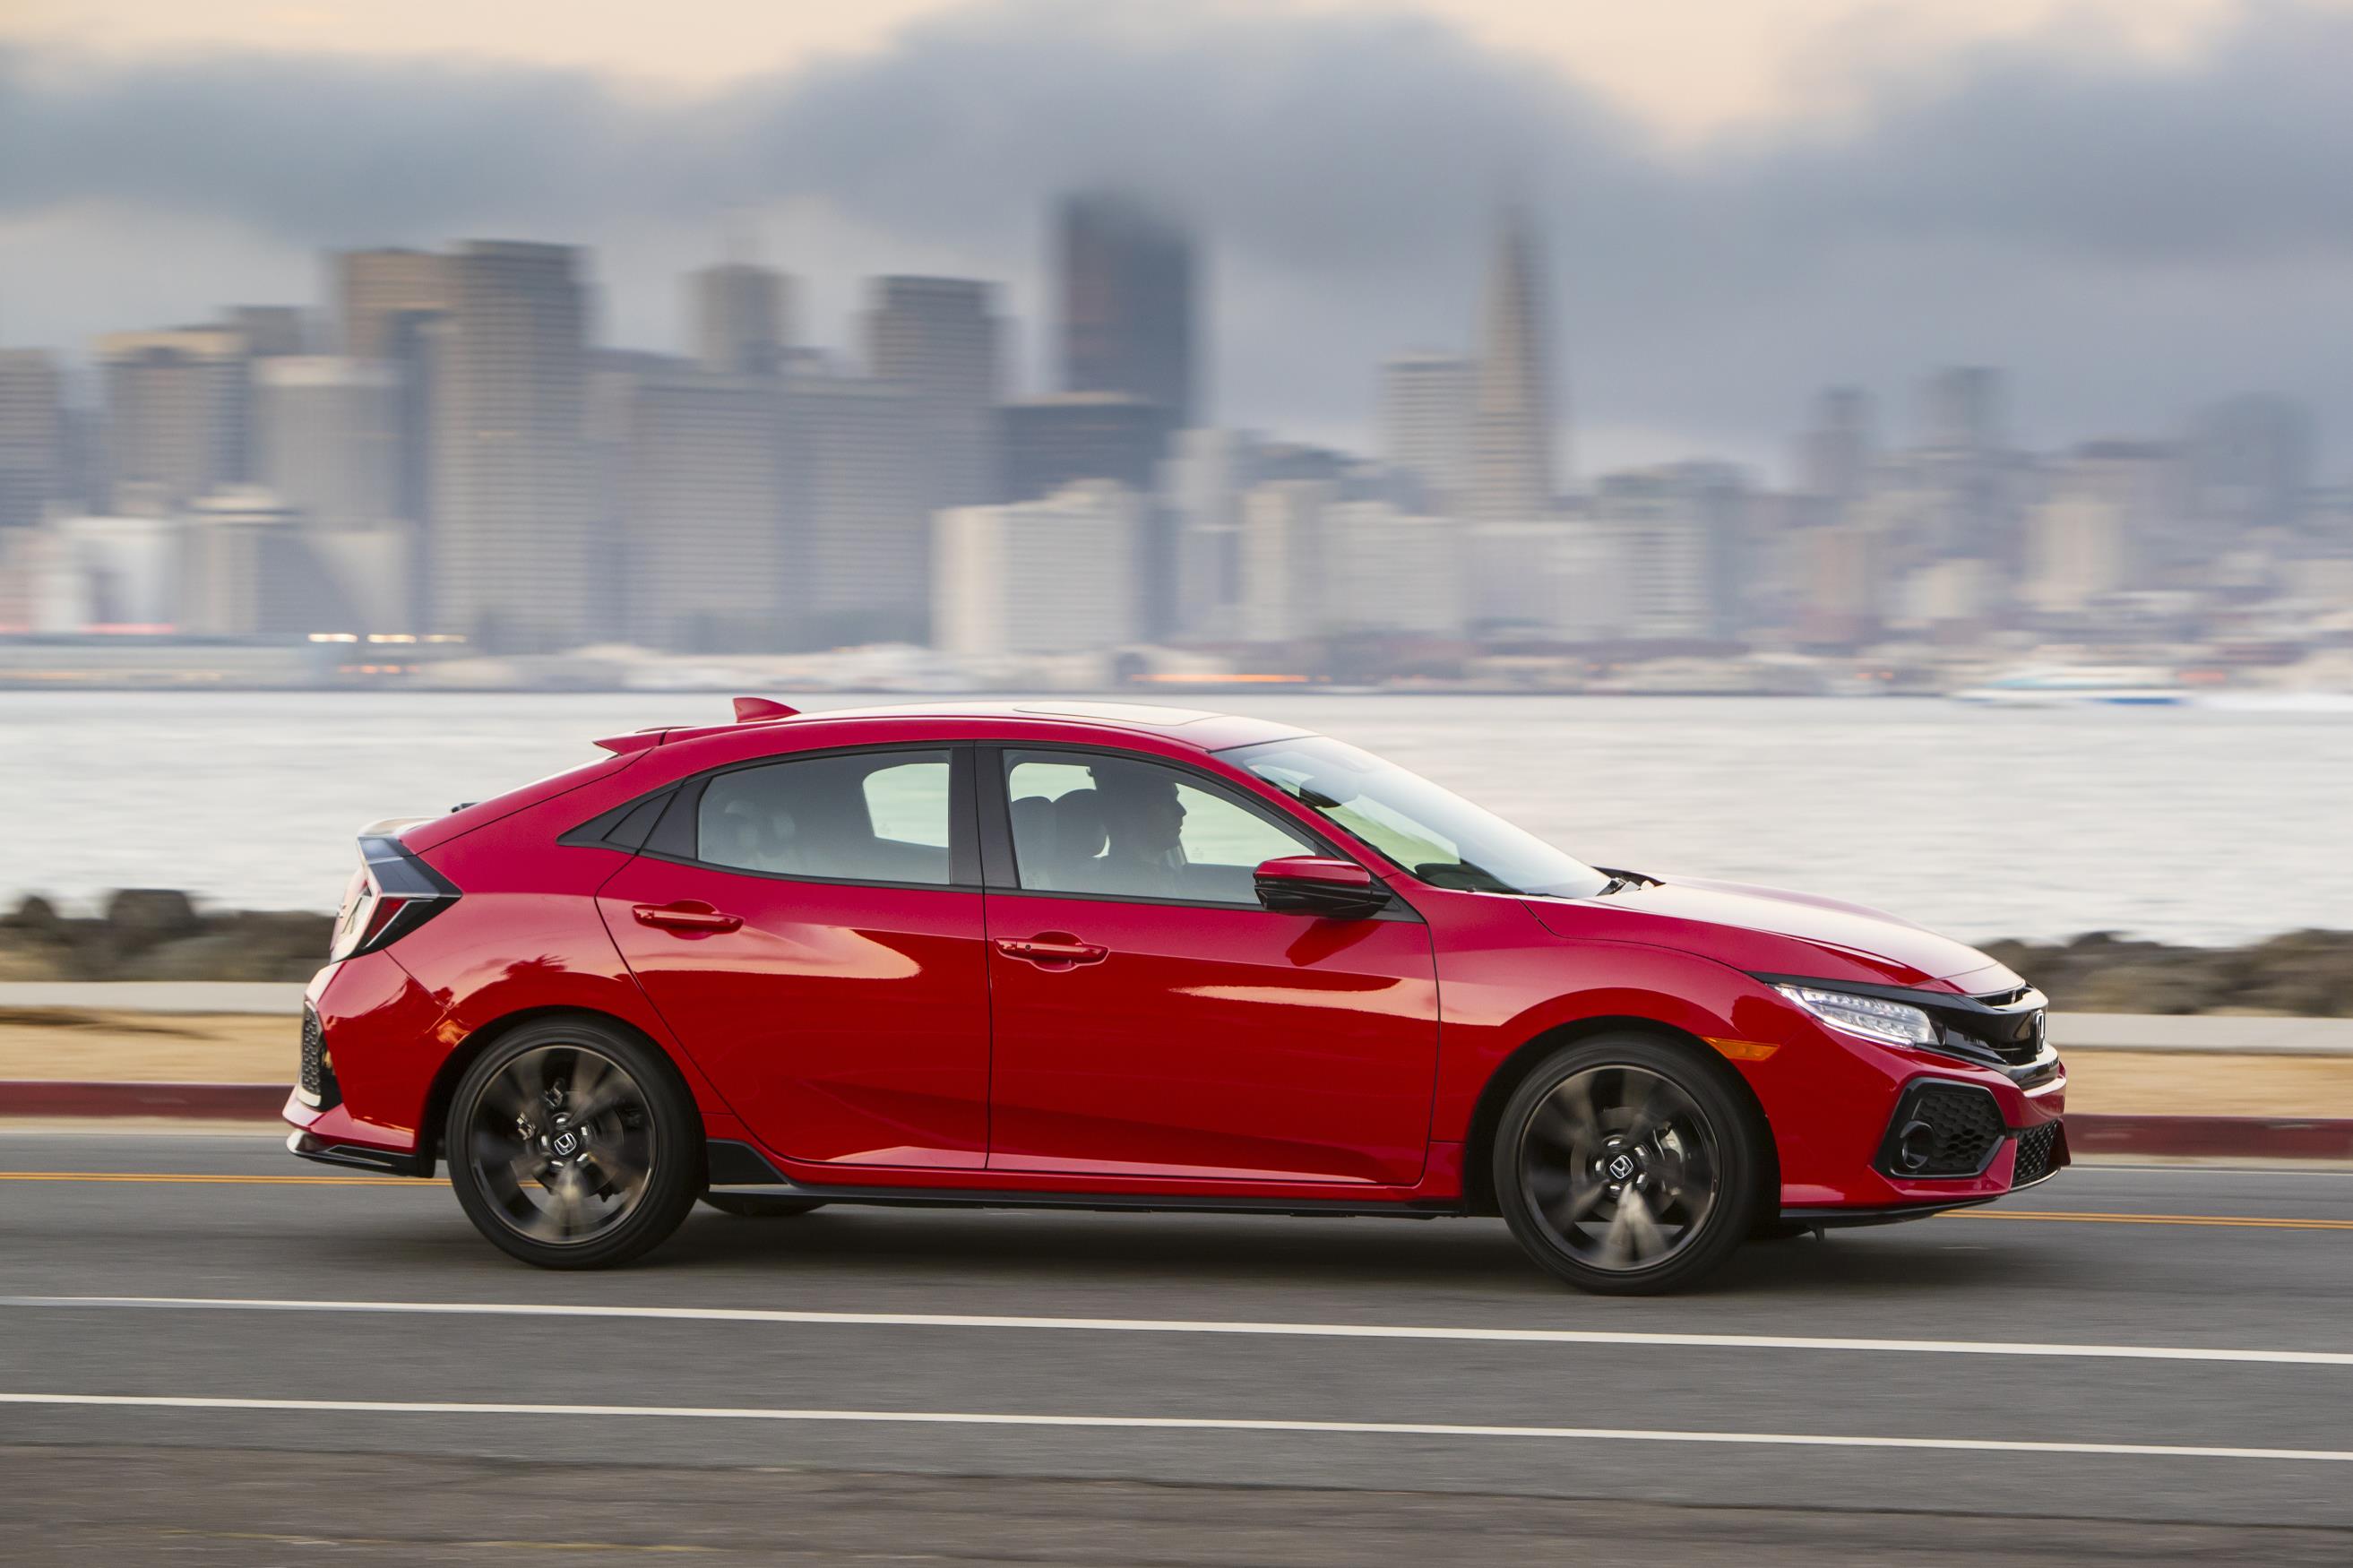 2017 Honda Civic Hatchback Arrives in America, Specs and Pricing ...